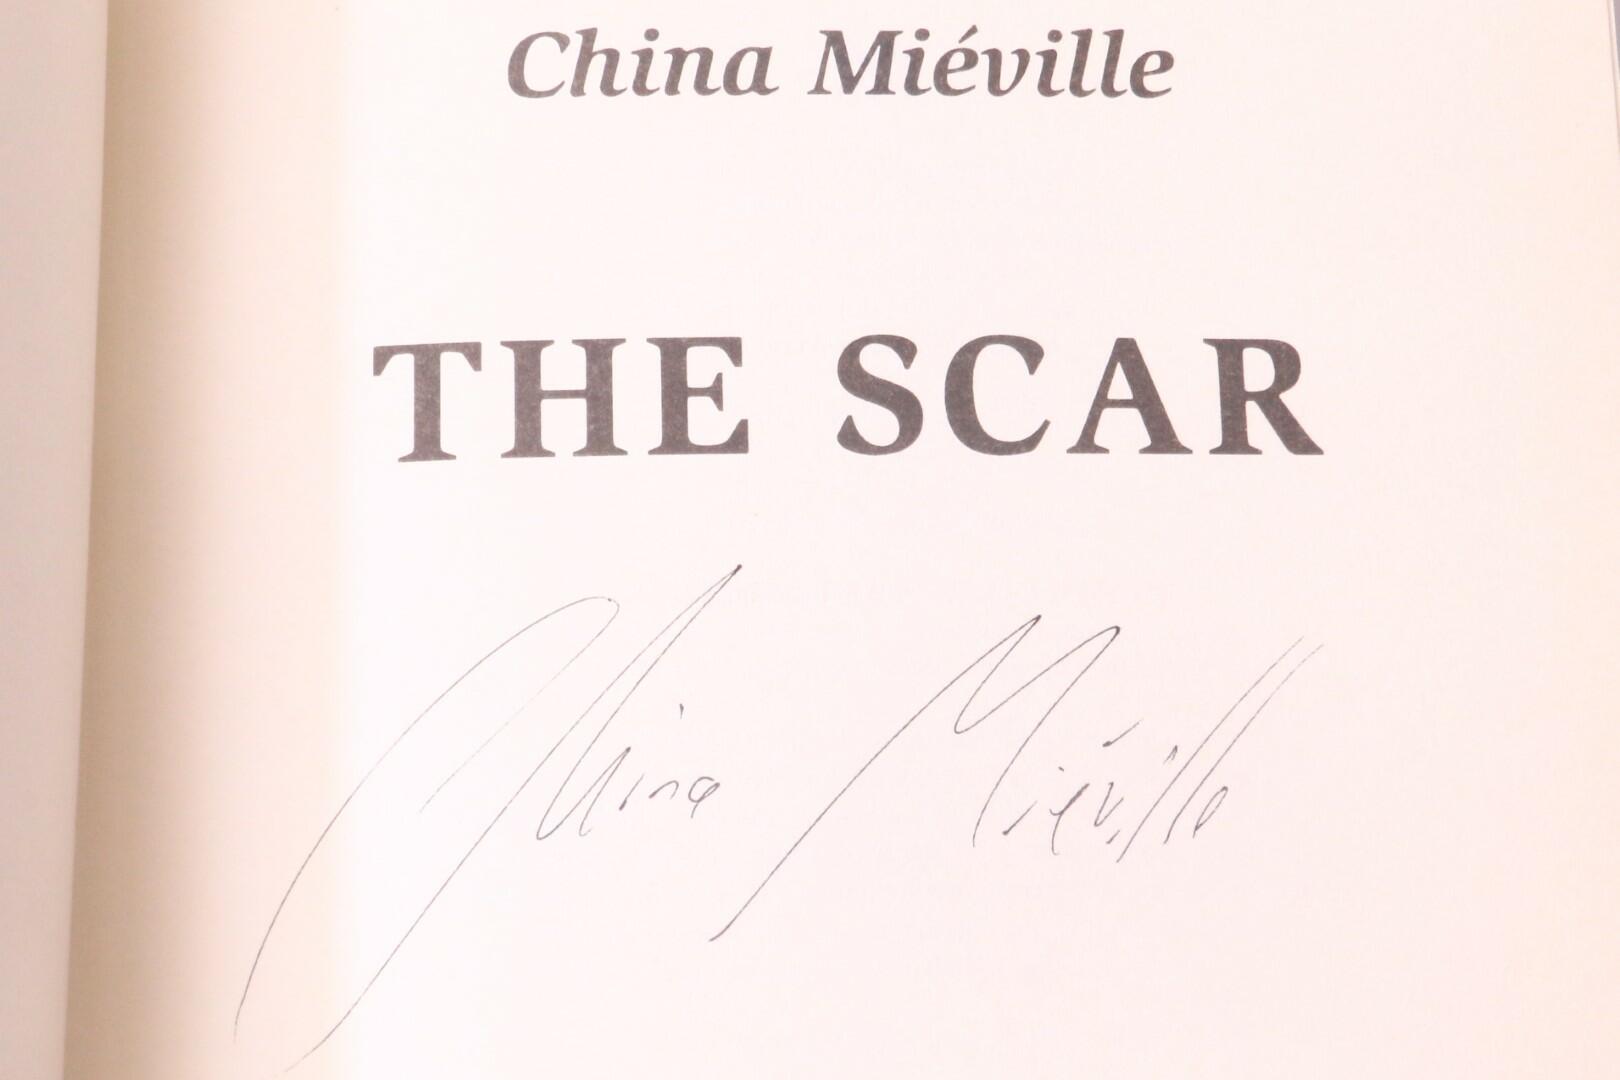 China Mieville - The Scar - Macmillan, 2002, First Edition.